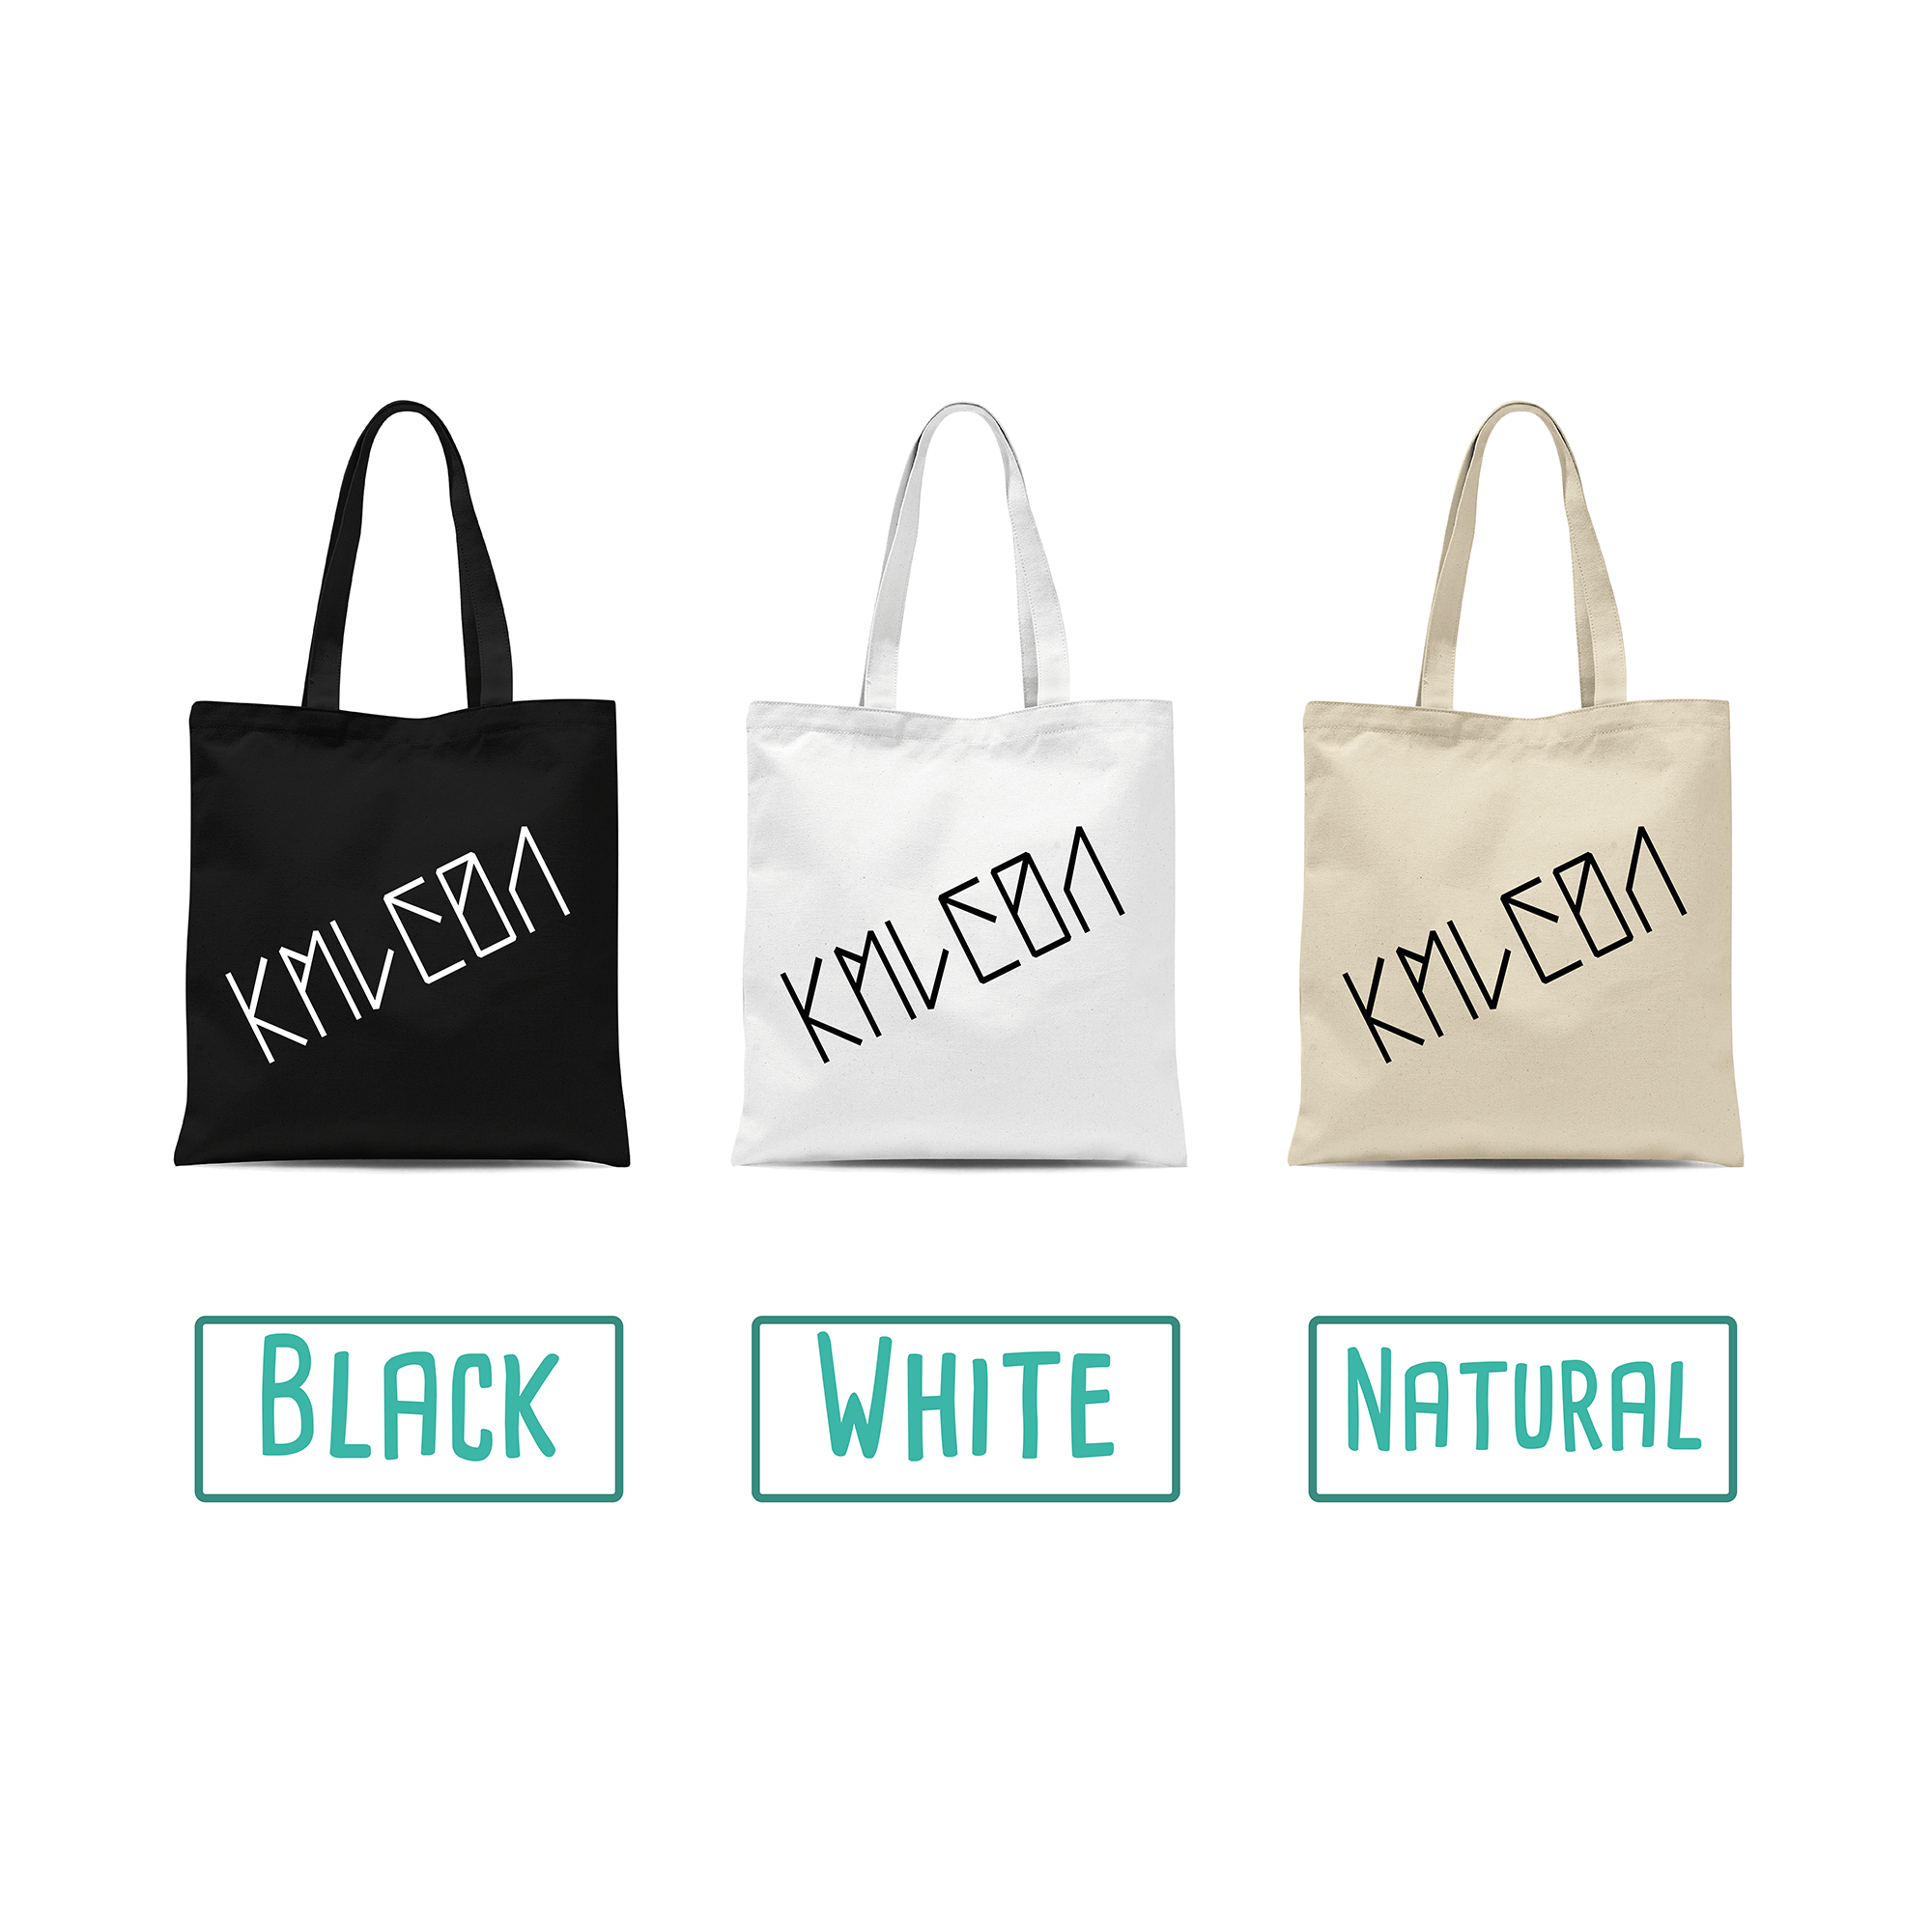 'Alcohol you later' tote bag